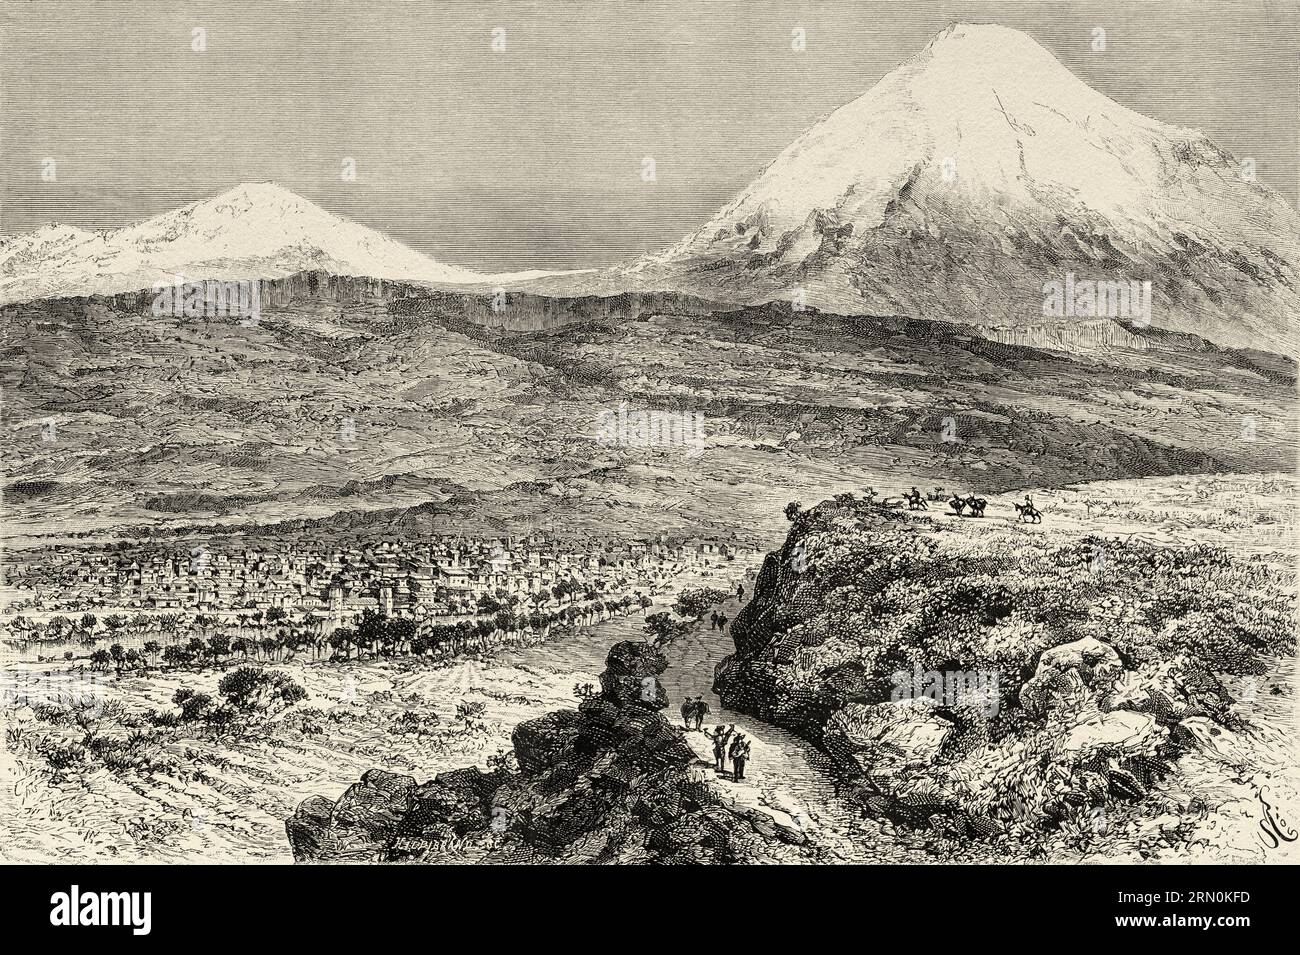 Cityscape of La Paz, Bolivia, South America. Journey in search of the remains of the Crevaux mission by Émile-Arthur Thouar 1884. Old 19th century engraving from Le Tour du Monde 1906 Stock Photo